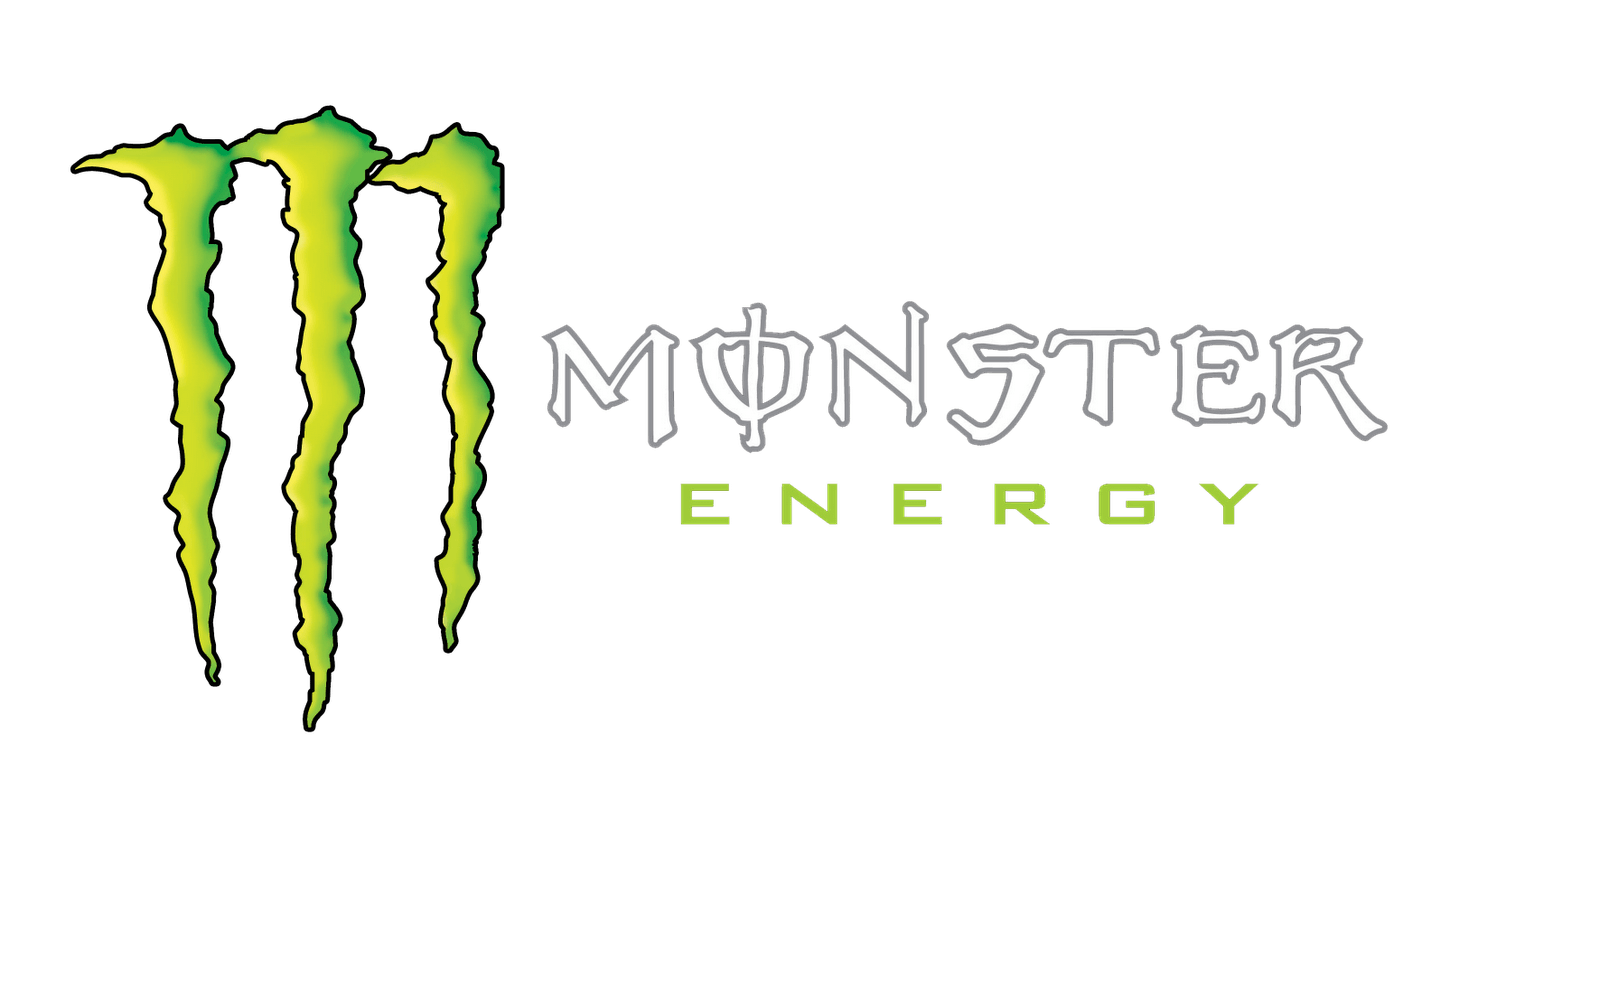 Logo clipart monster energy and in color logo clipart